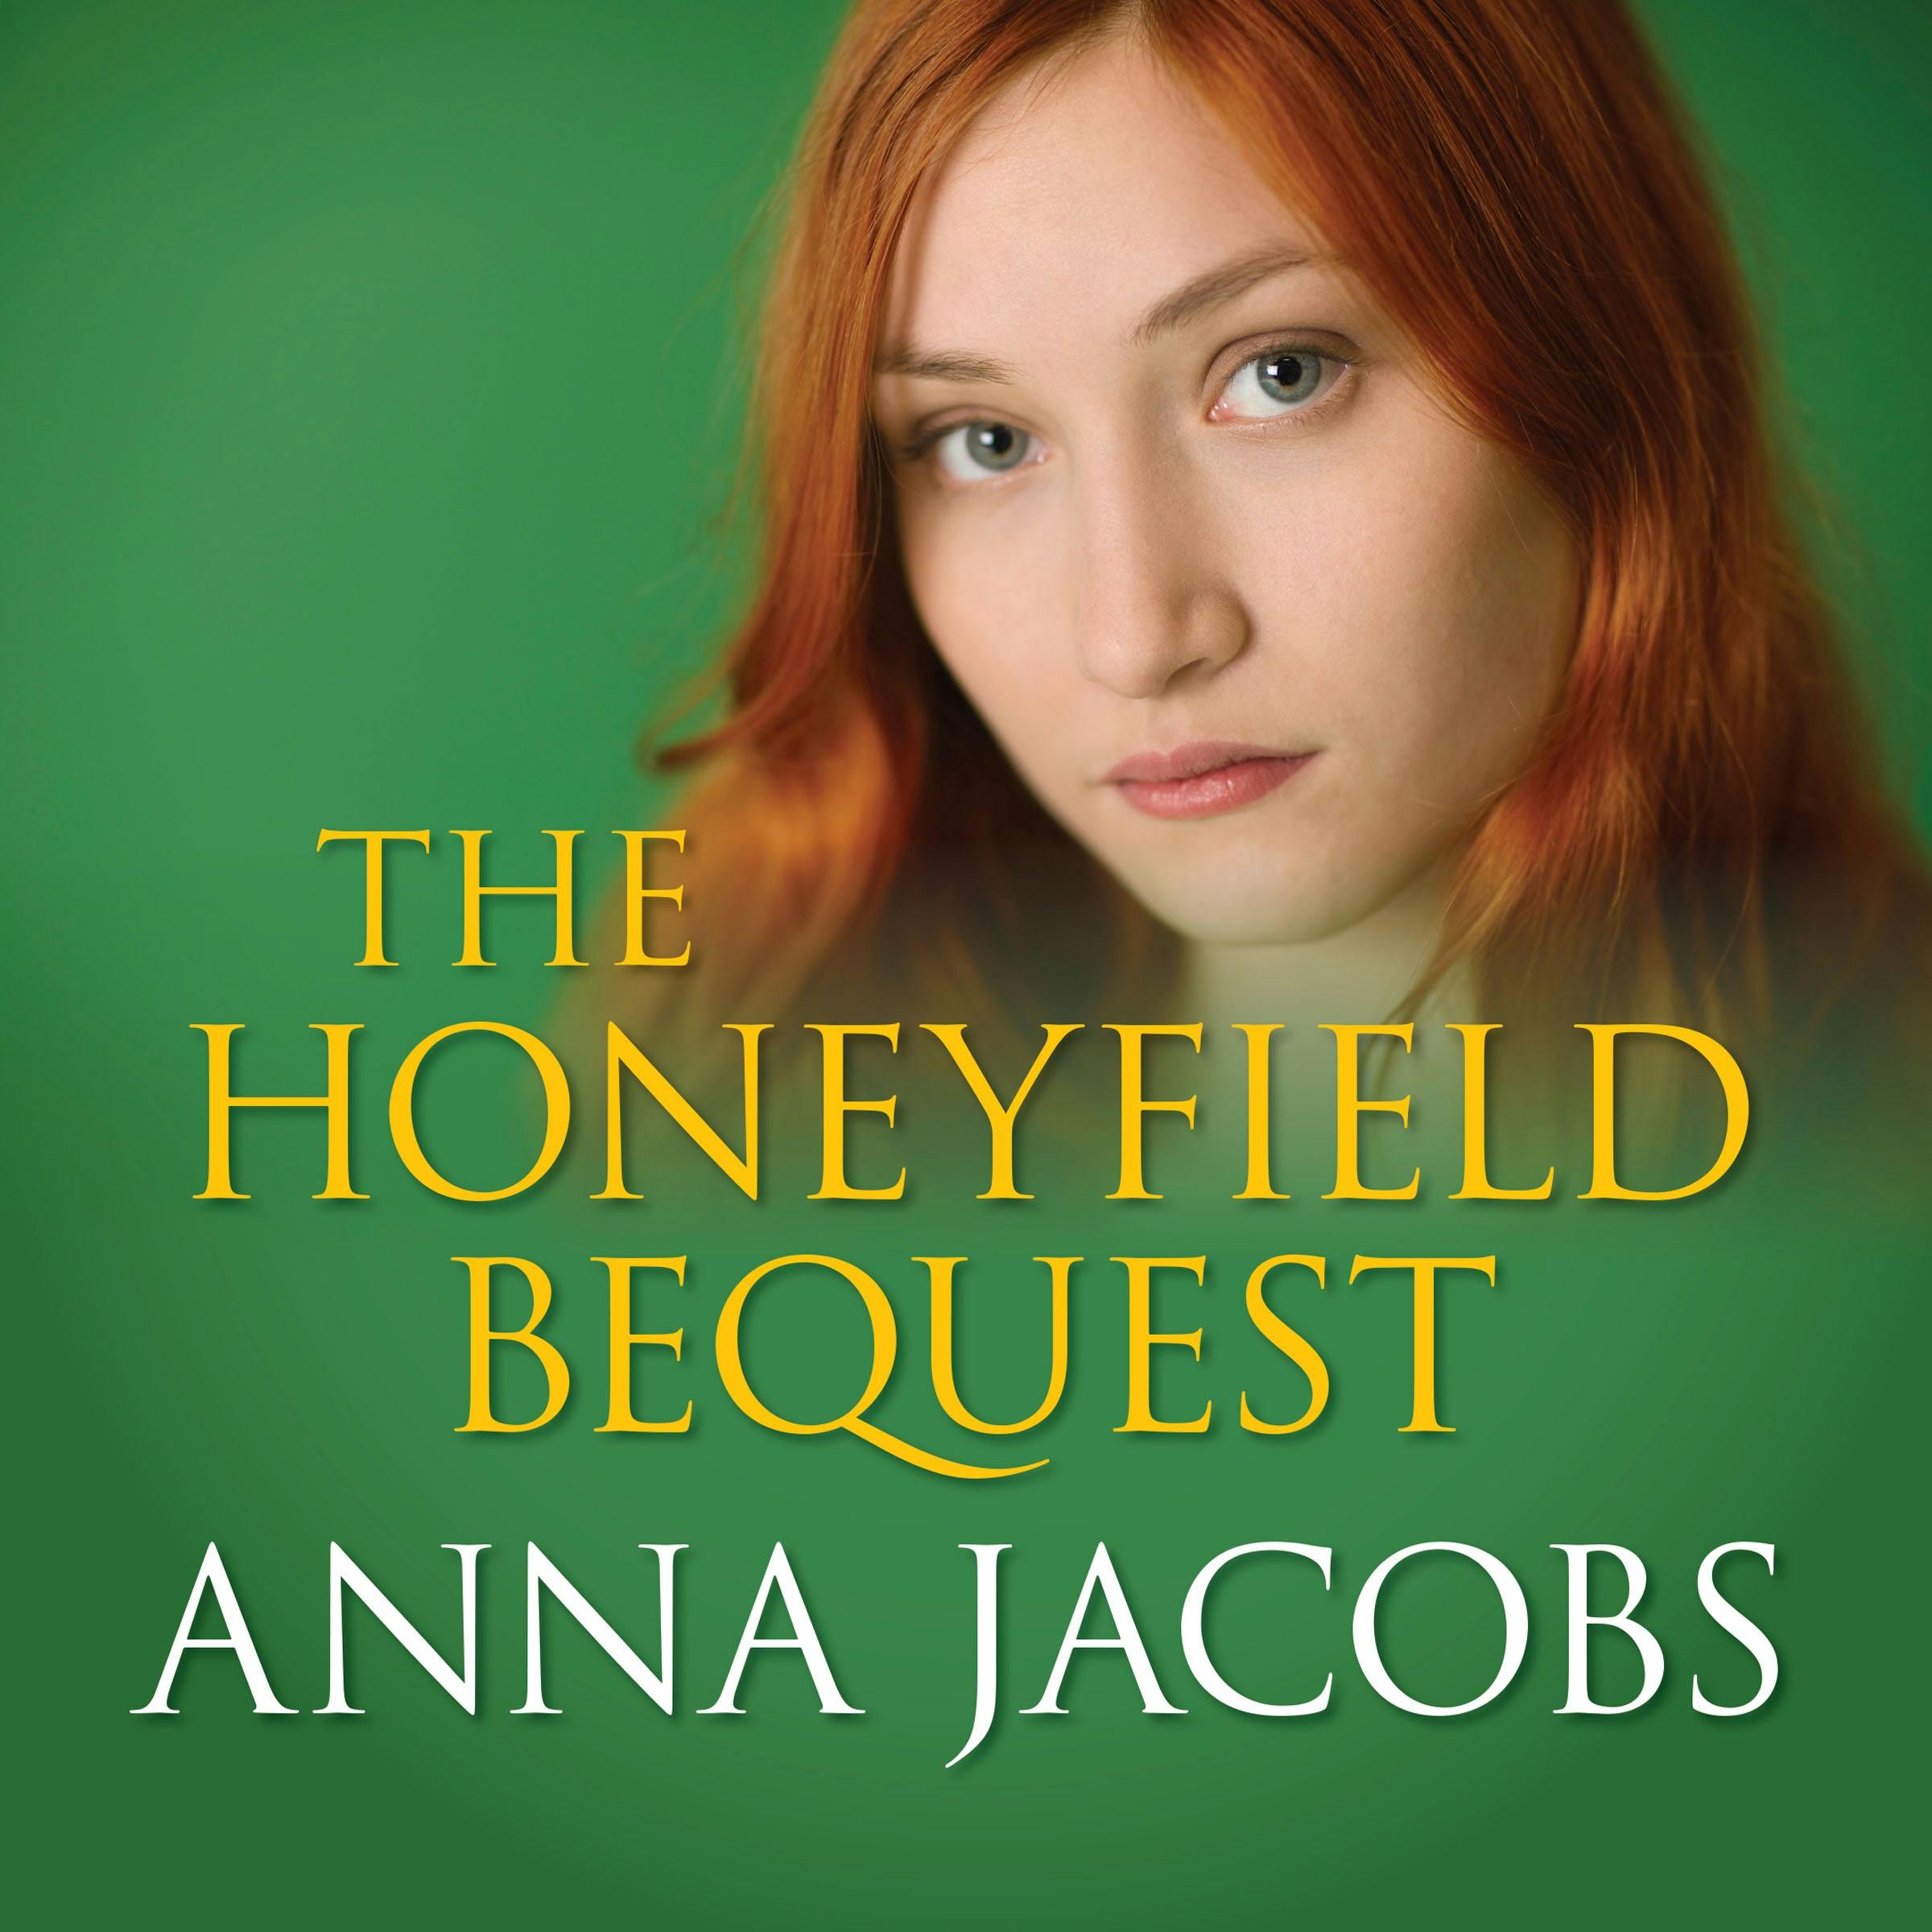 The Honeyfield Bequest - Anna Jacobs